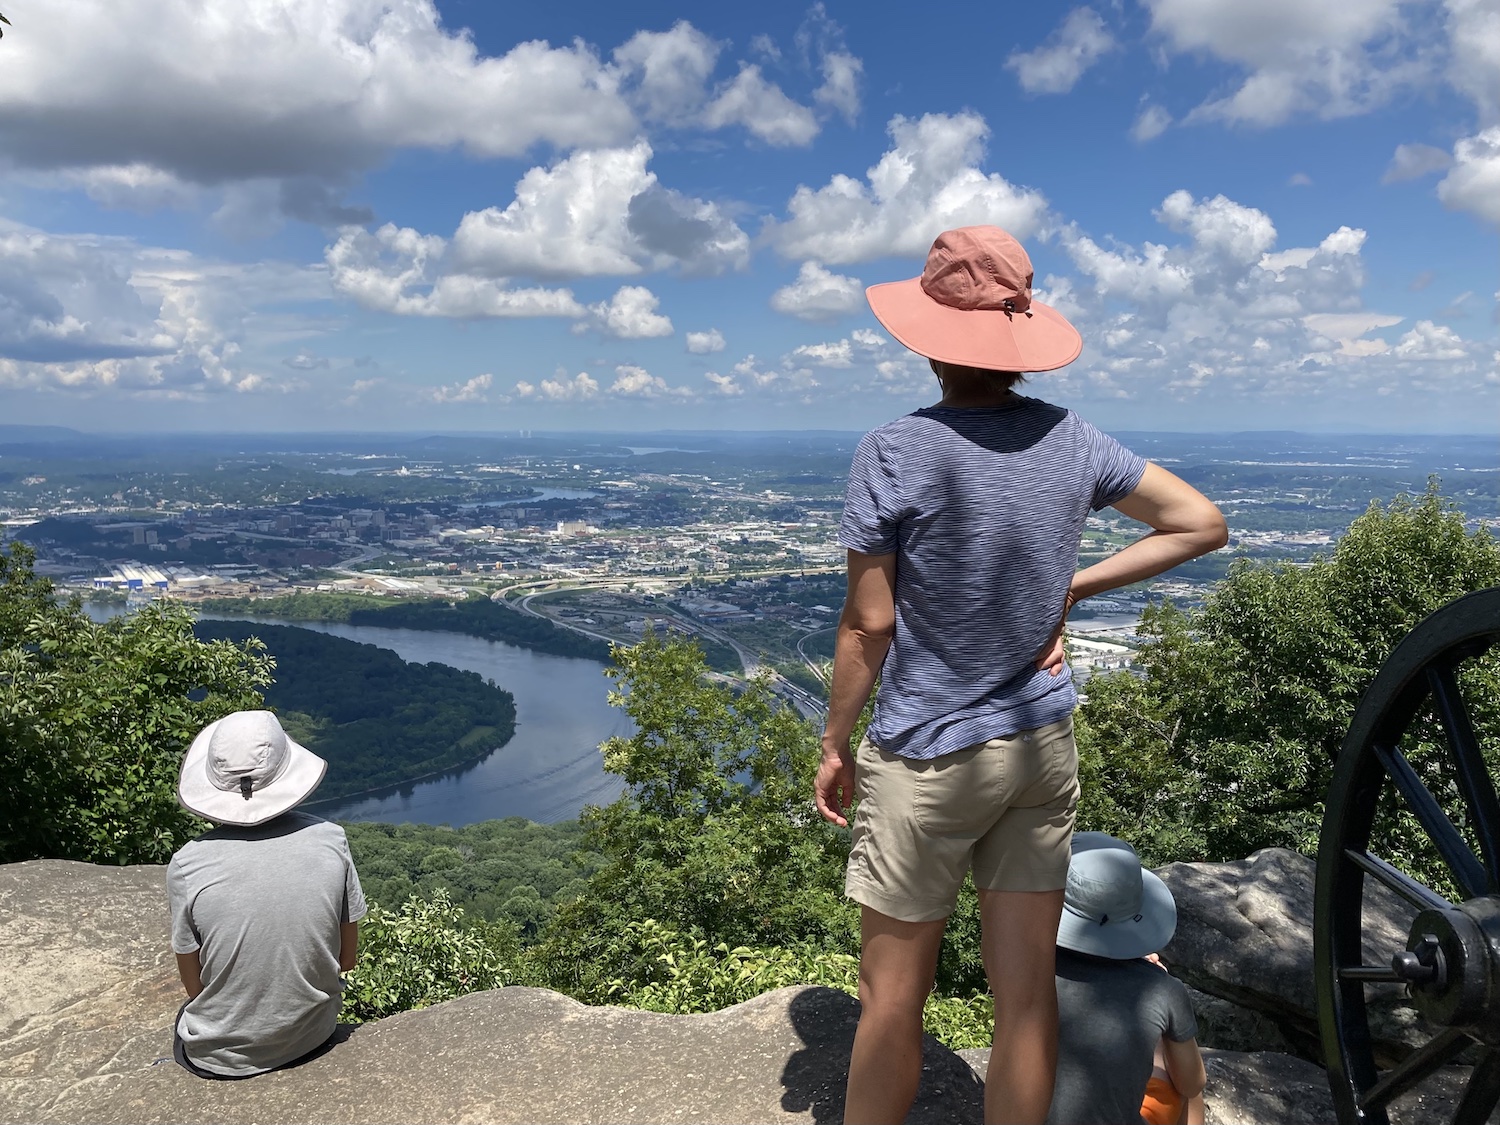 JPEG vs HEIC: Tourists looking out over a city and a river from on top of a mountain.